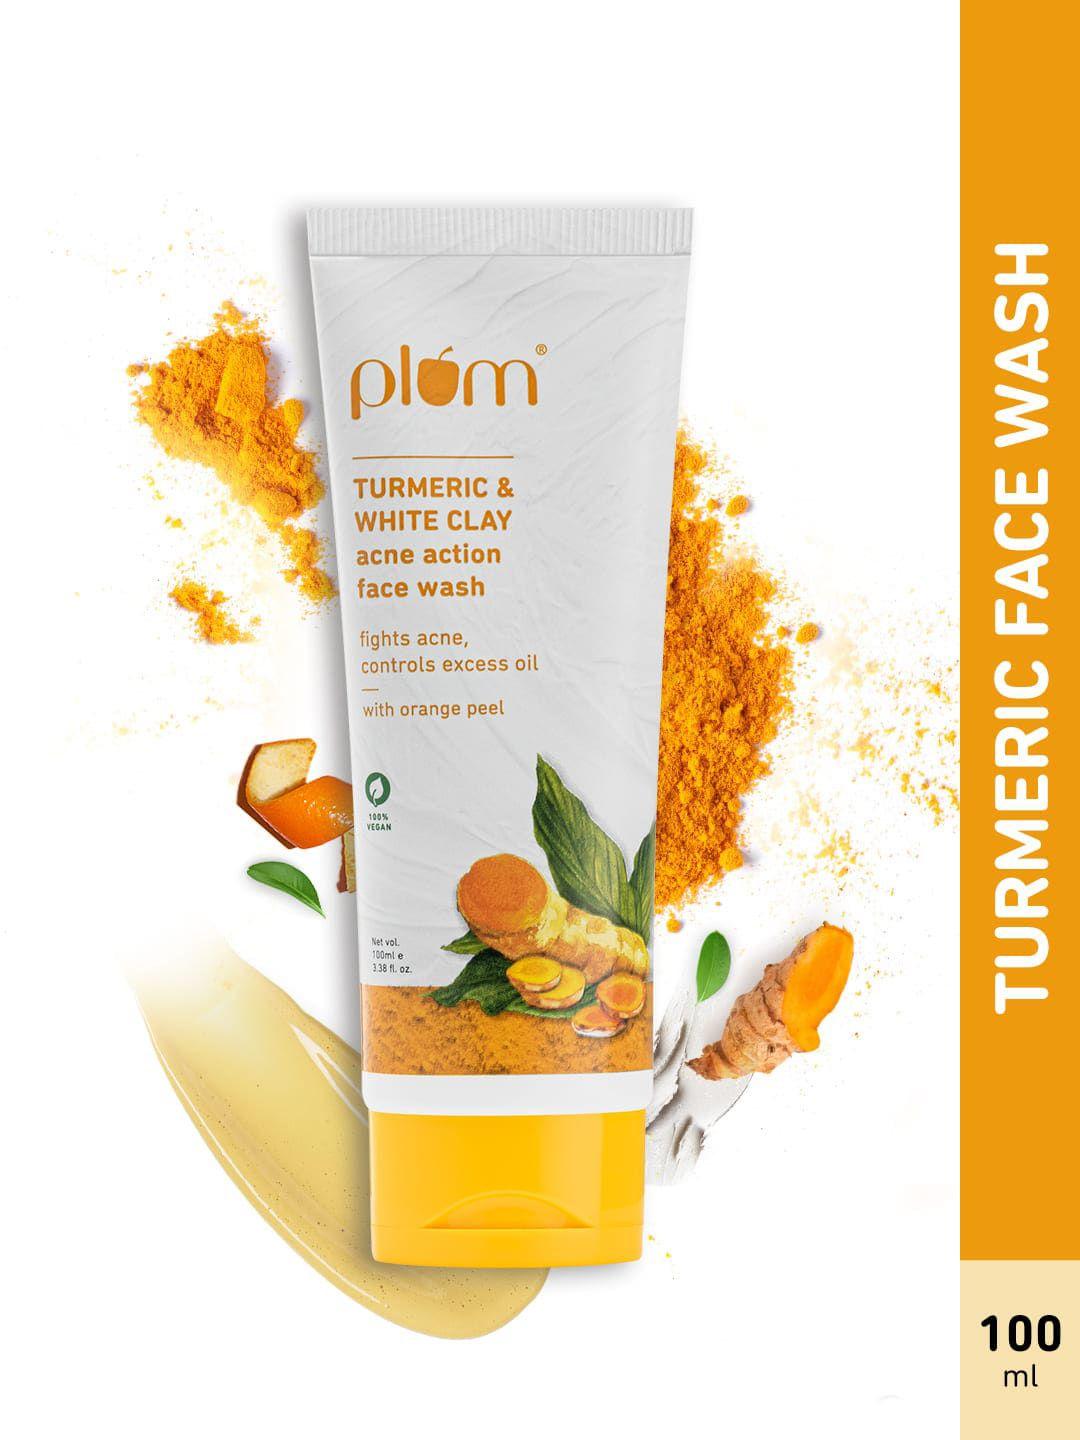 plum turmeric & white clay acne action face wash  100ml